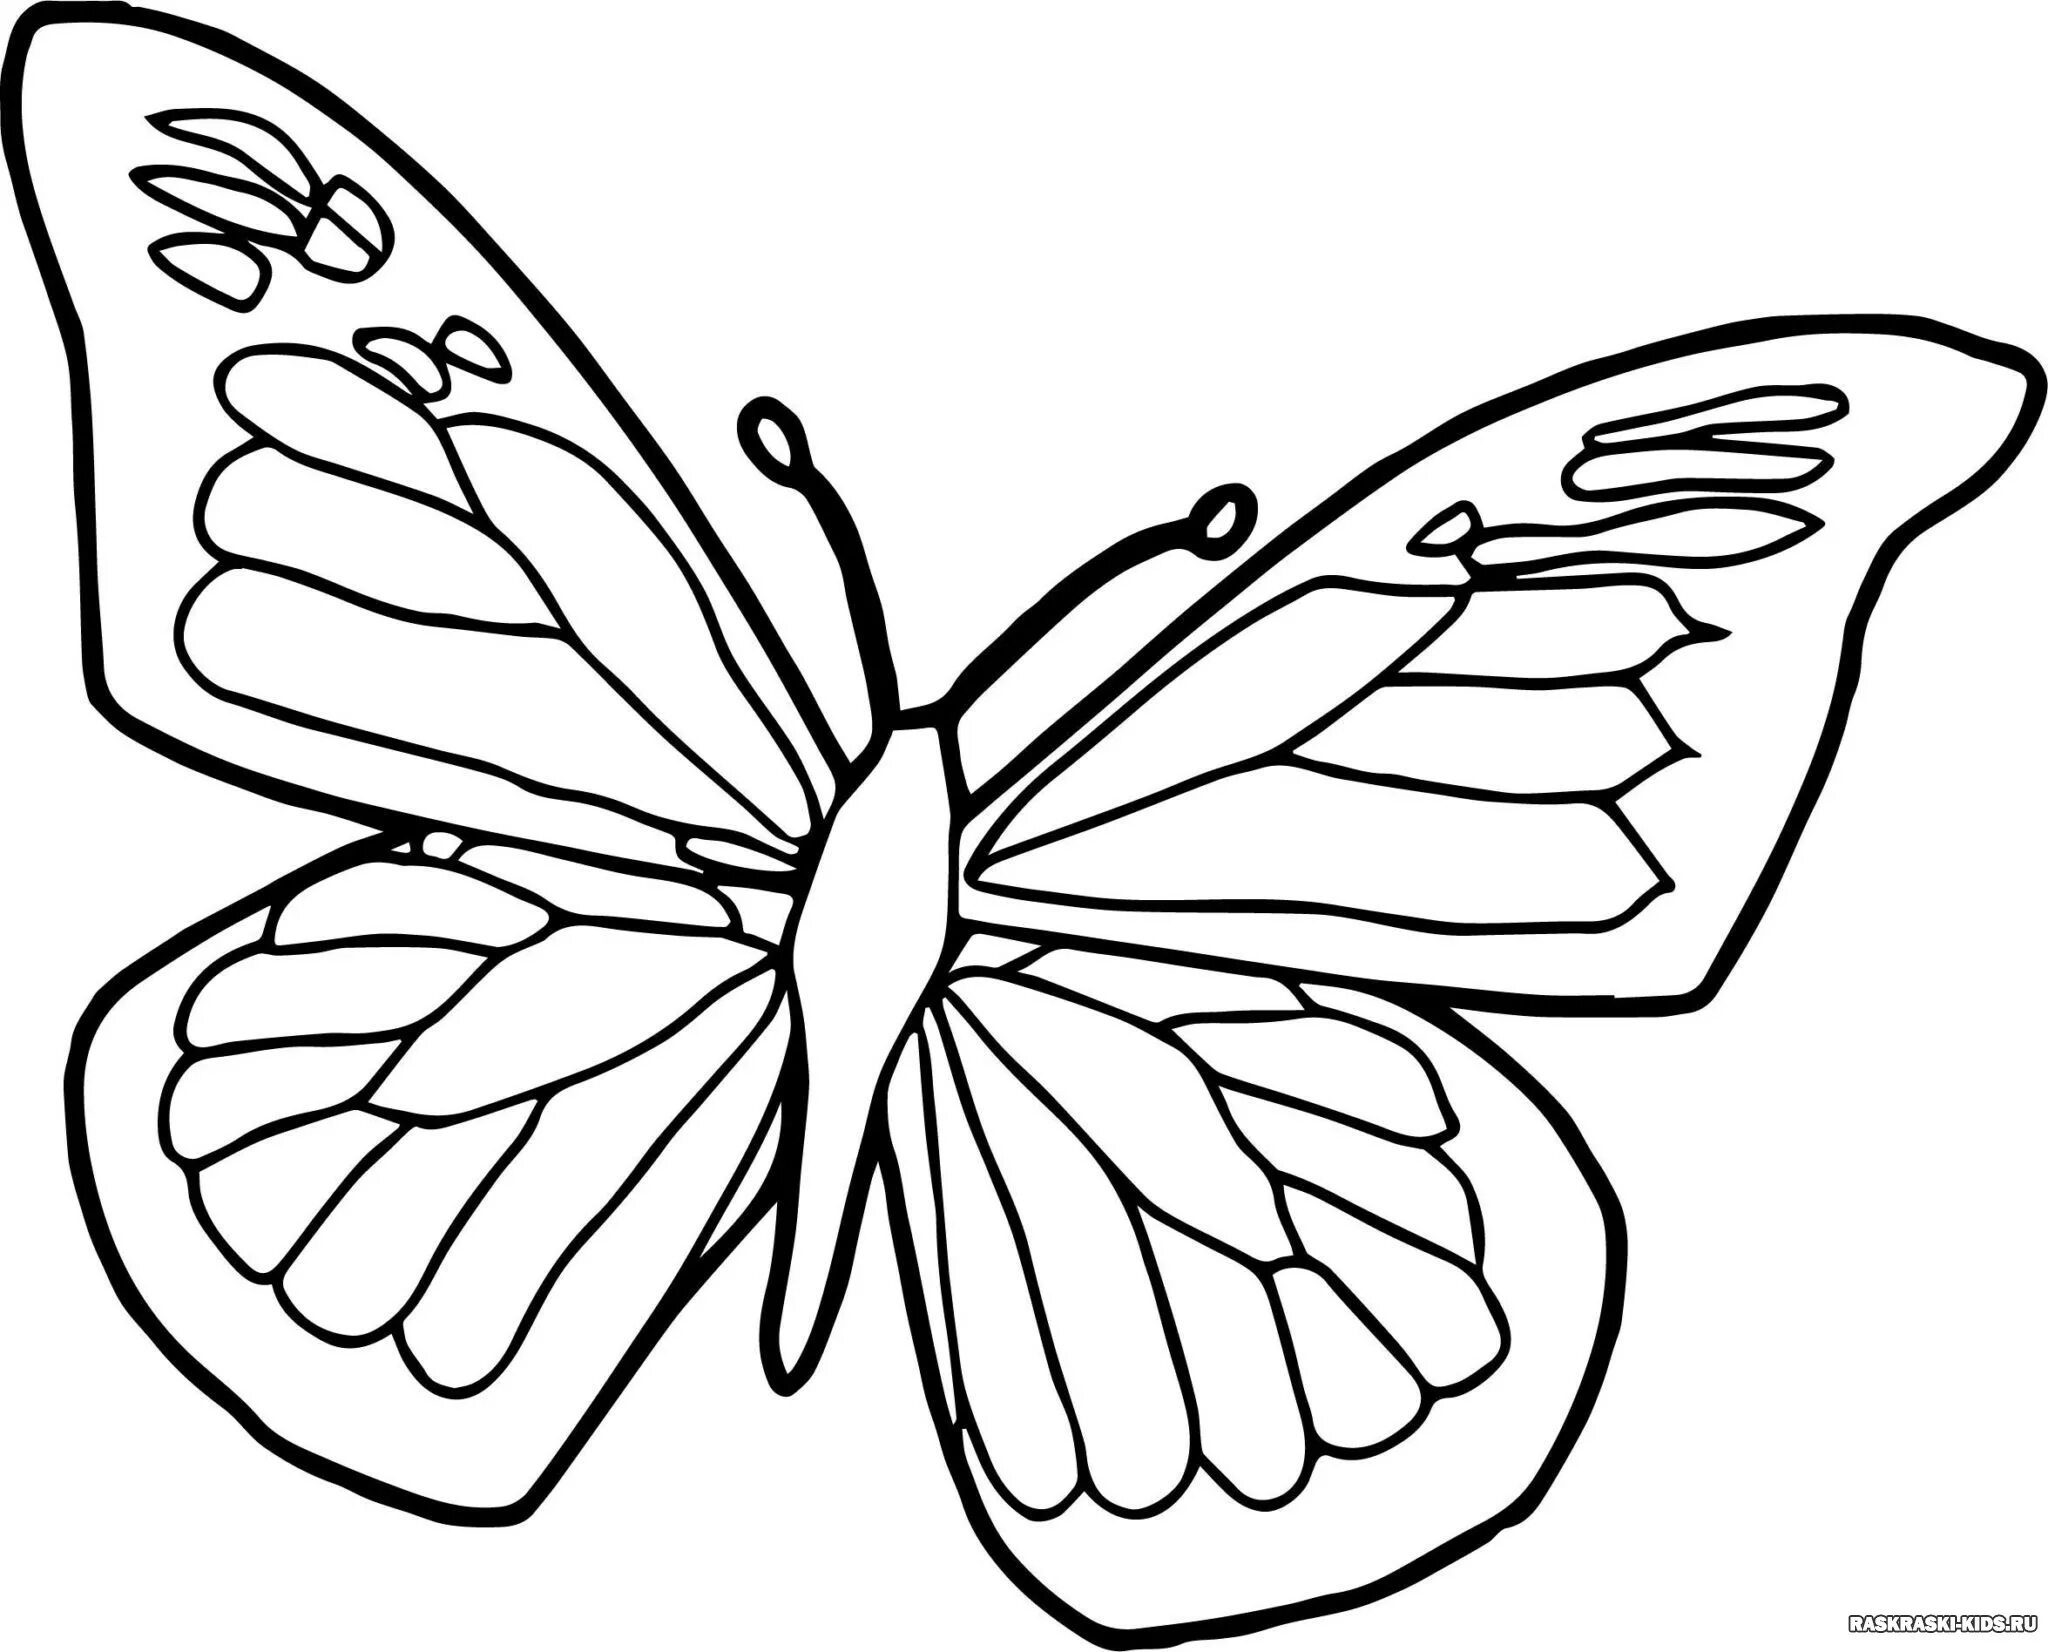 Coloring book brightly lit butterfly